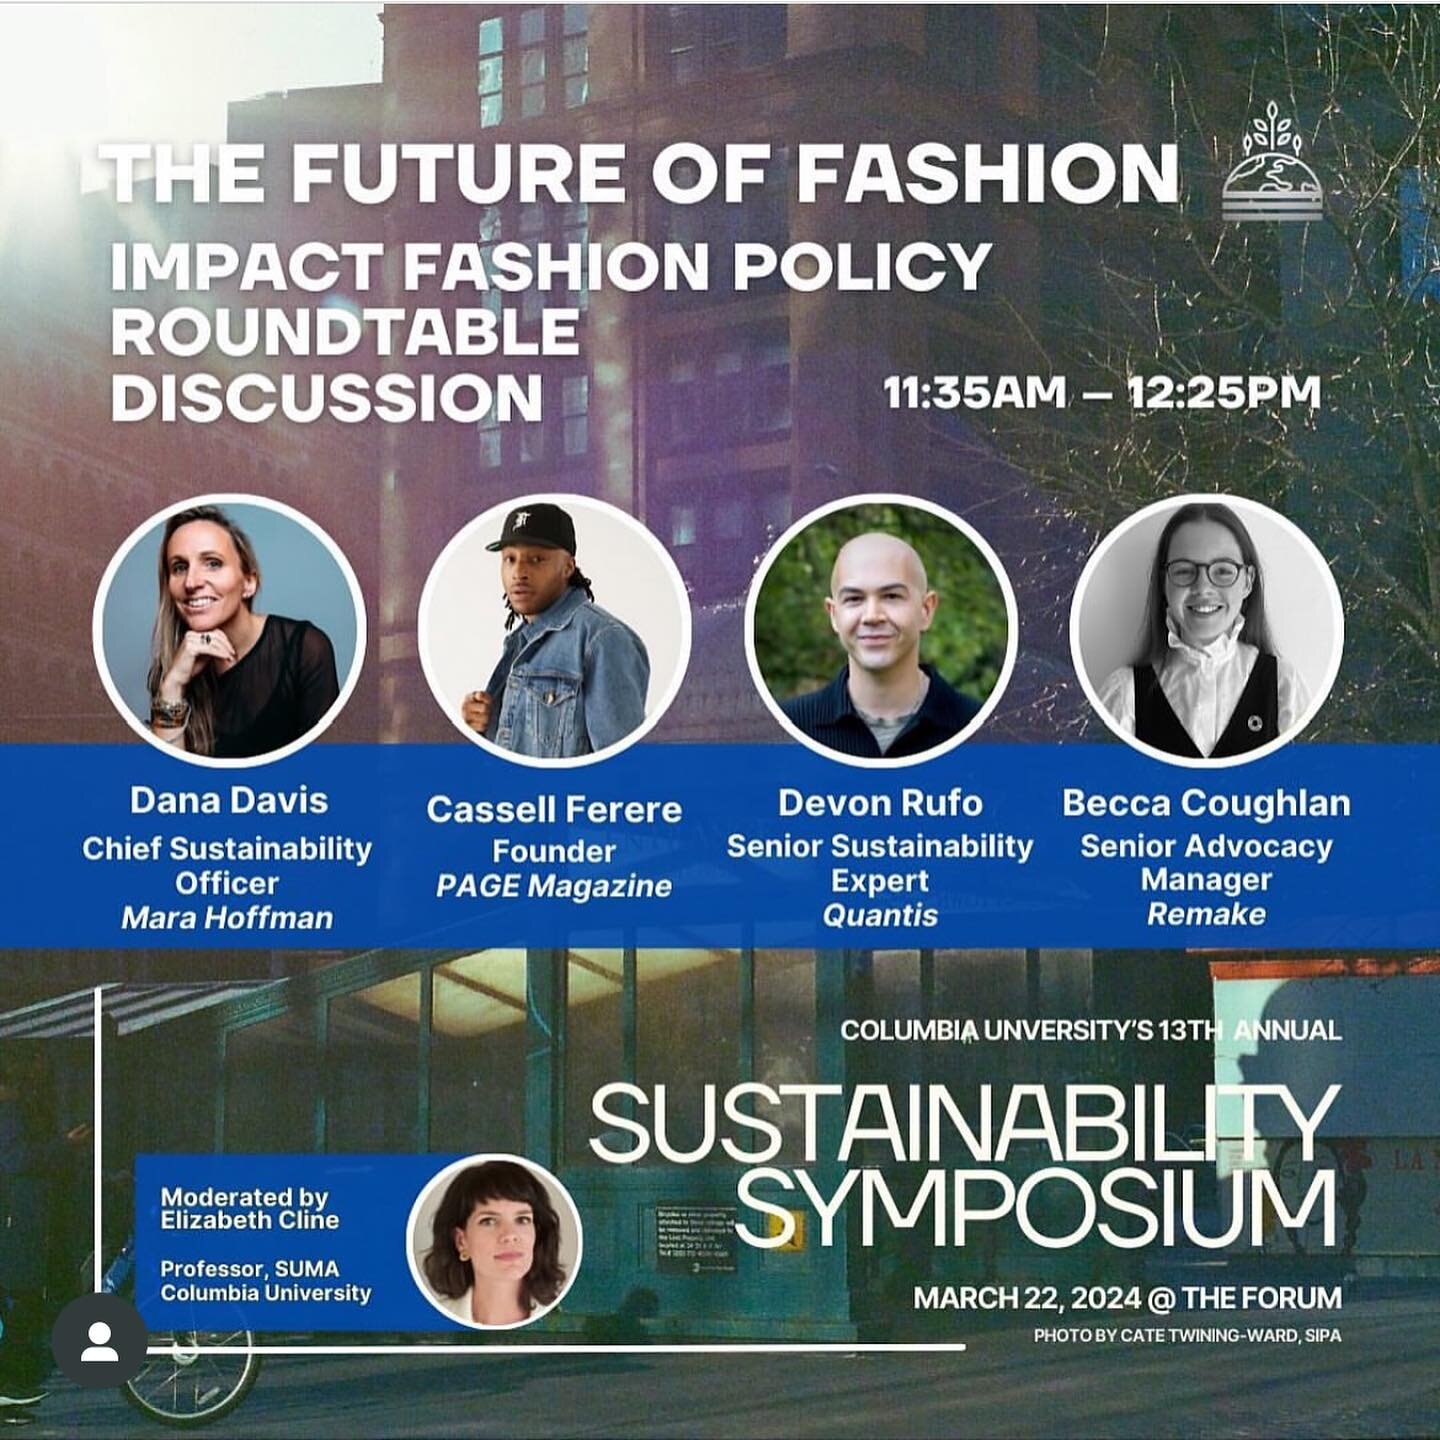 Had an opportunity to give the @reveriepage perspective on fashion policy. Thank you @columbiaalumni.suma @columbia &hellip; cc: @canuteharoldson 

The Future of Fashion: Impact Fashion Policy Roundtable Discussion

For those paying attention to hash